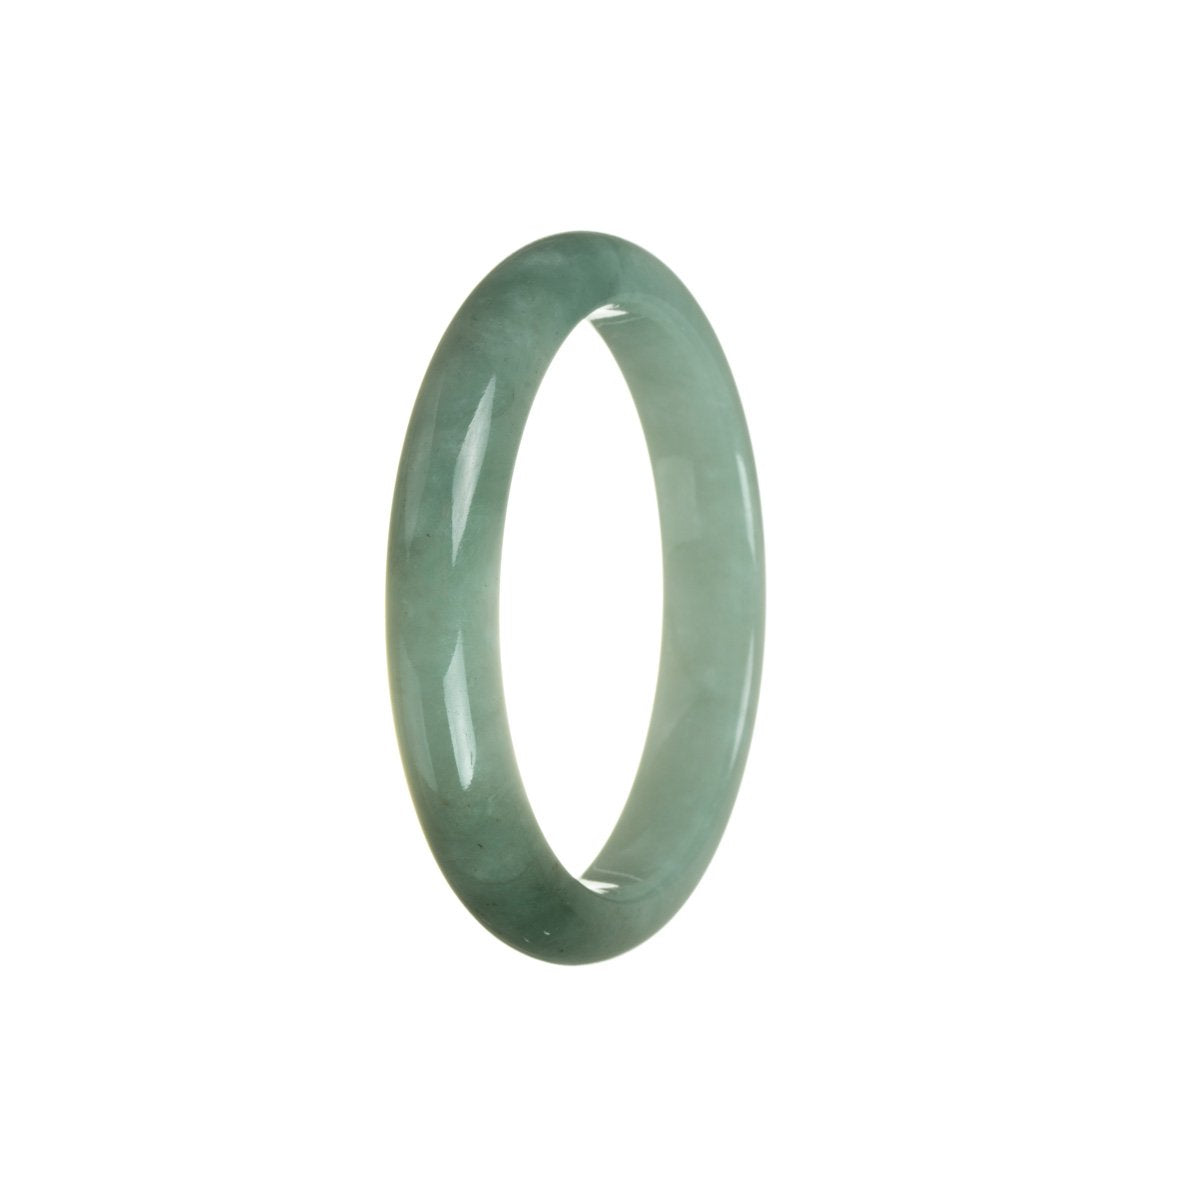 A half moon shaped bangle bracelet made of genuine, untreated green Burmese jade, measuring 55mm in diameter. Adorn your wrist with this stunning and authentic piece from MAYS.